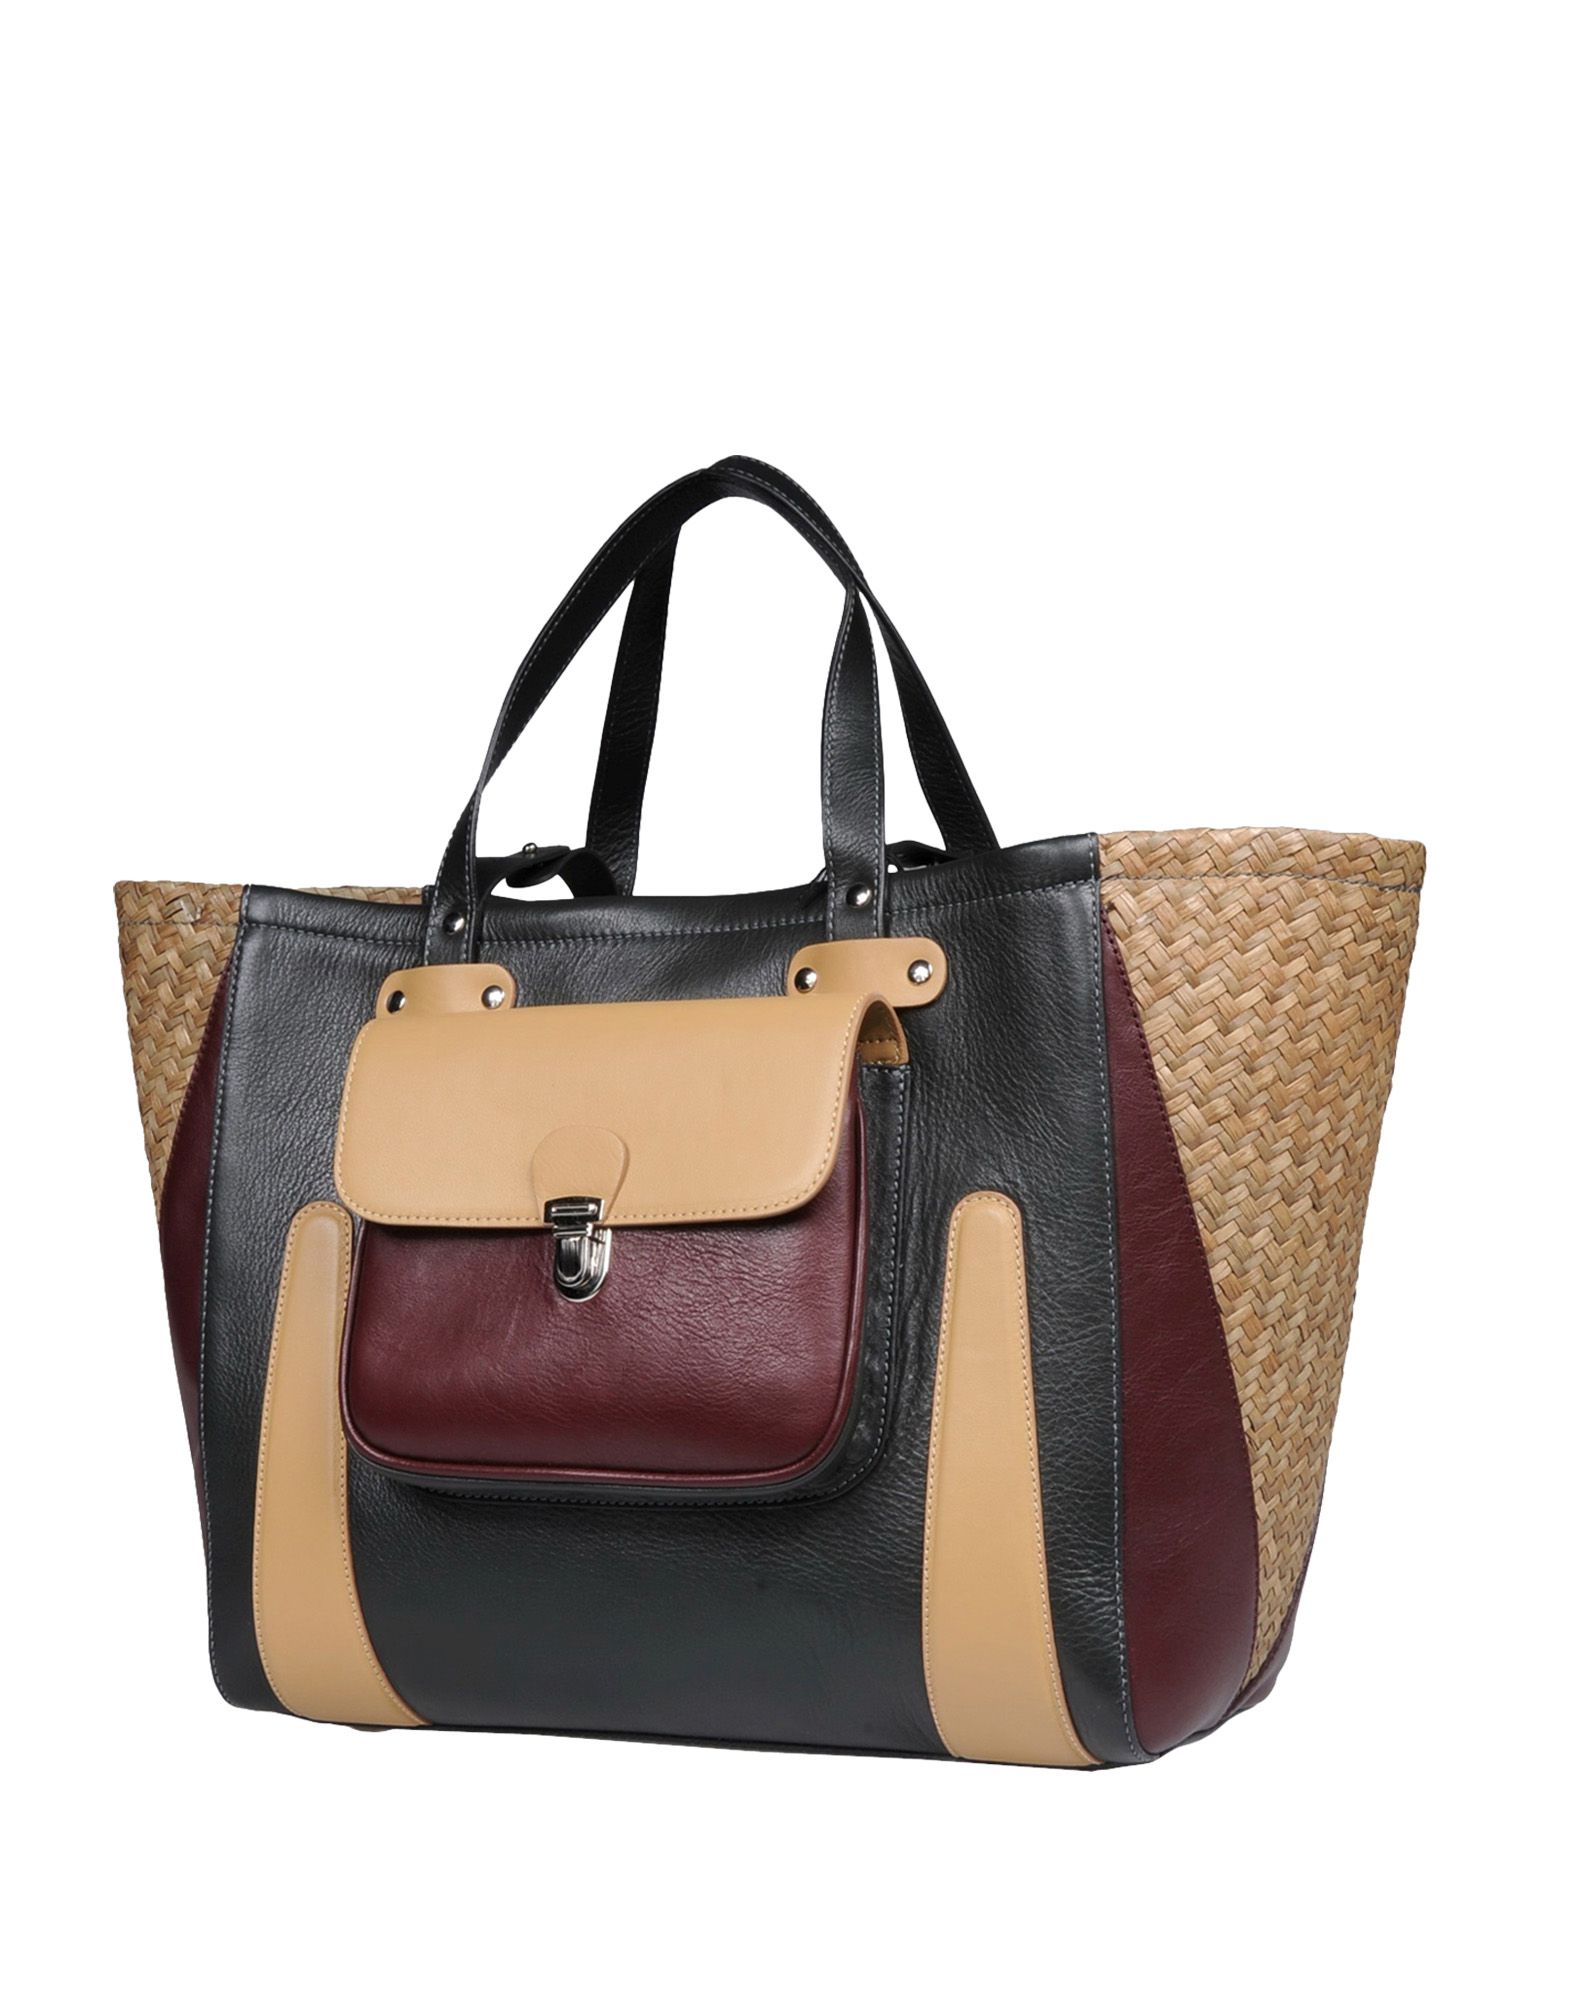 Carven Round Leather Bag in Brown | Lyst